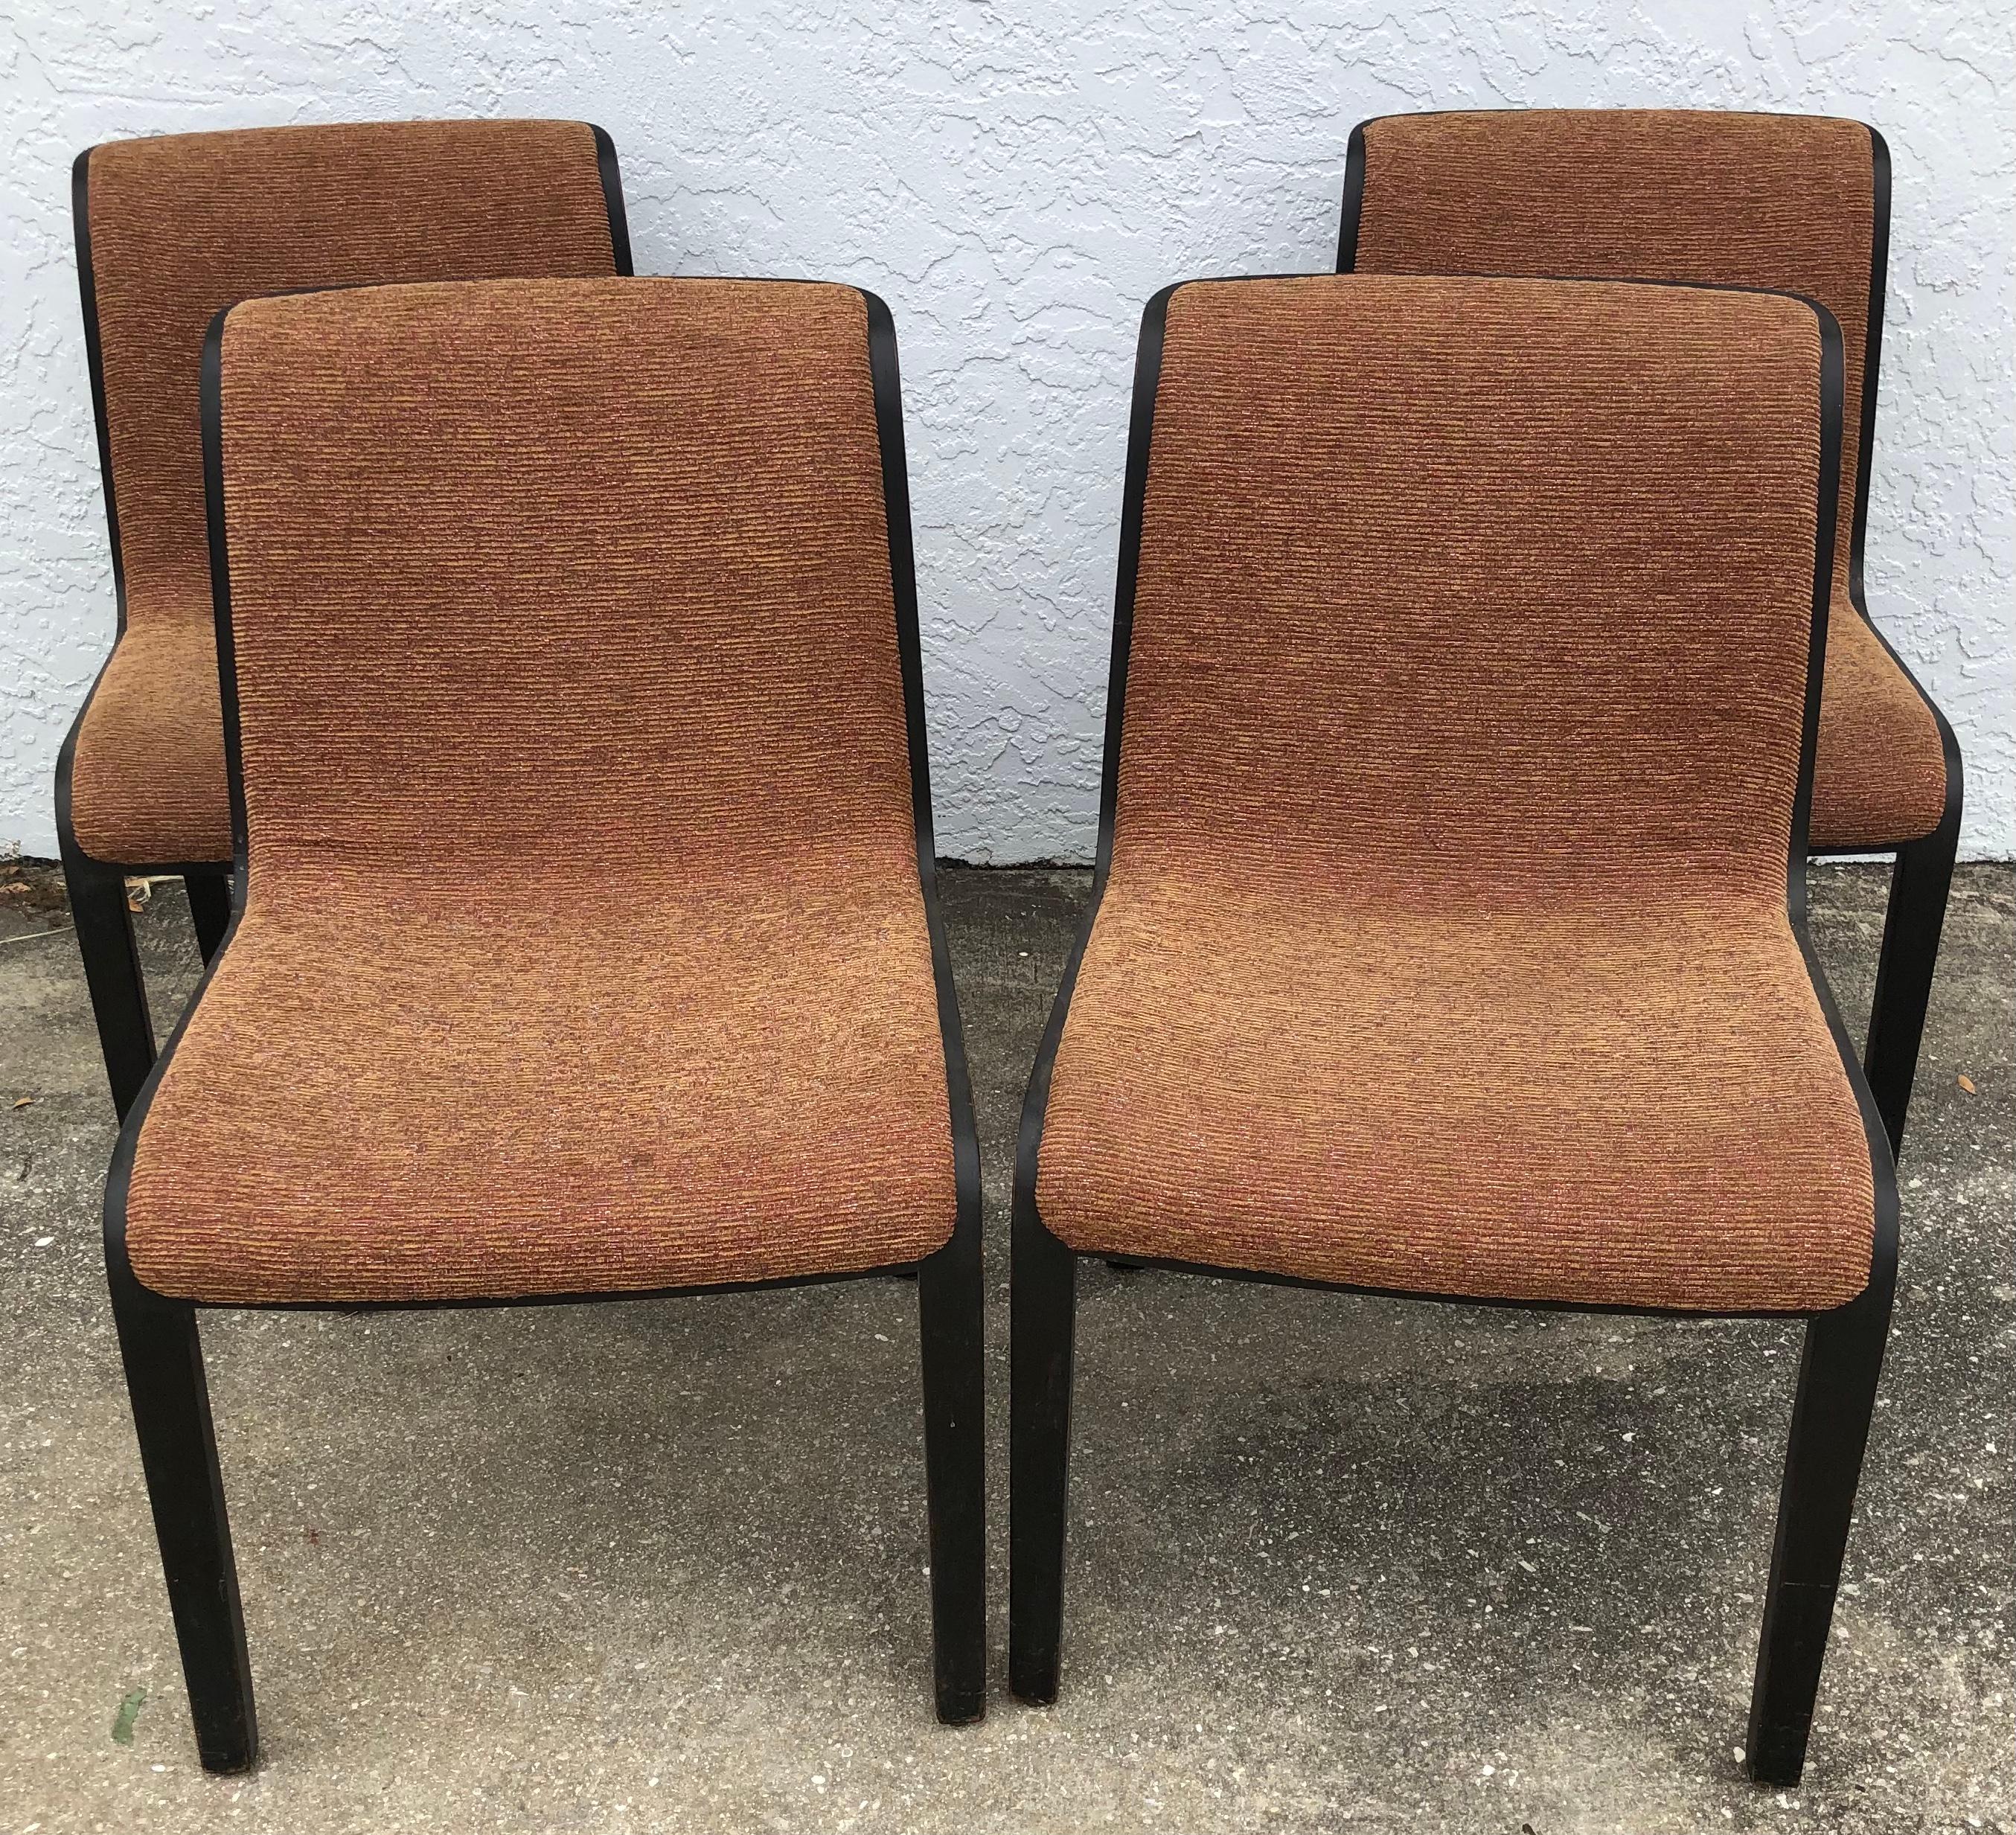 Set of 4 Mid-Century Modern Bill Stephens Knoll Black Walnut Side Chairs For Sale 2